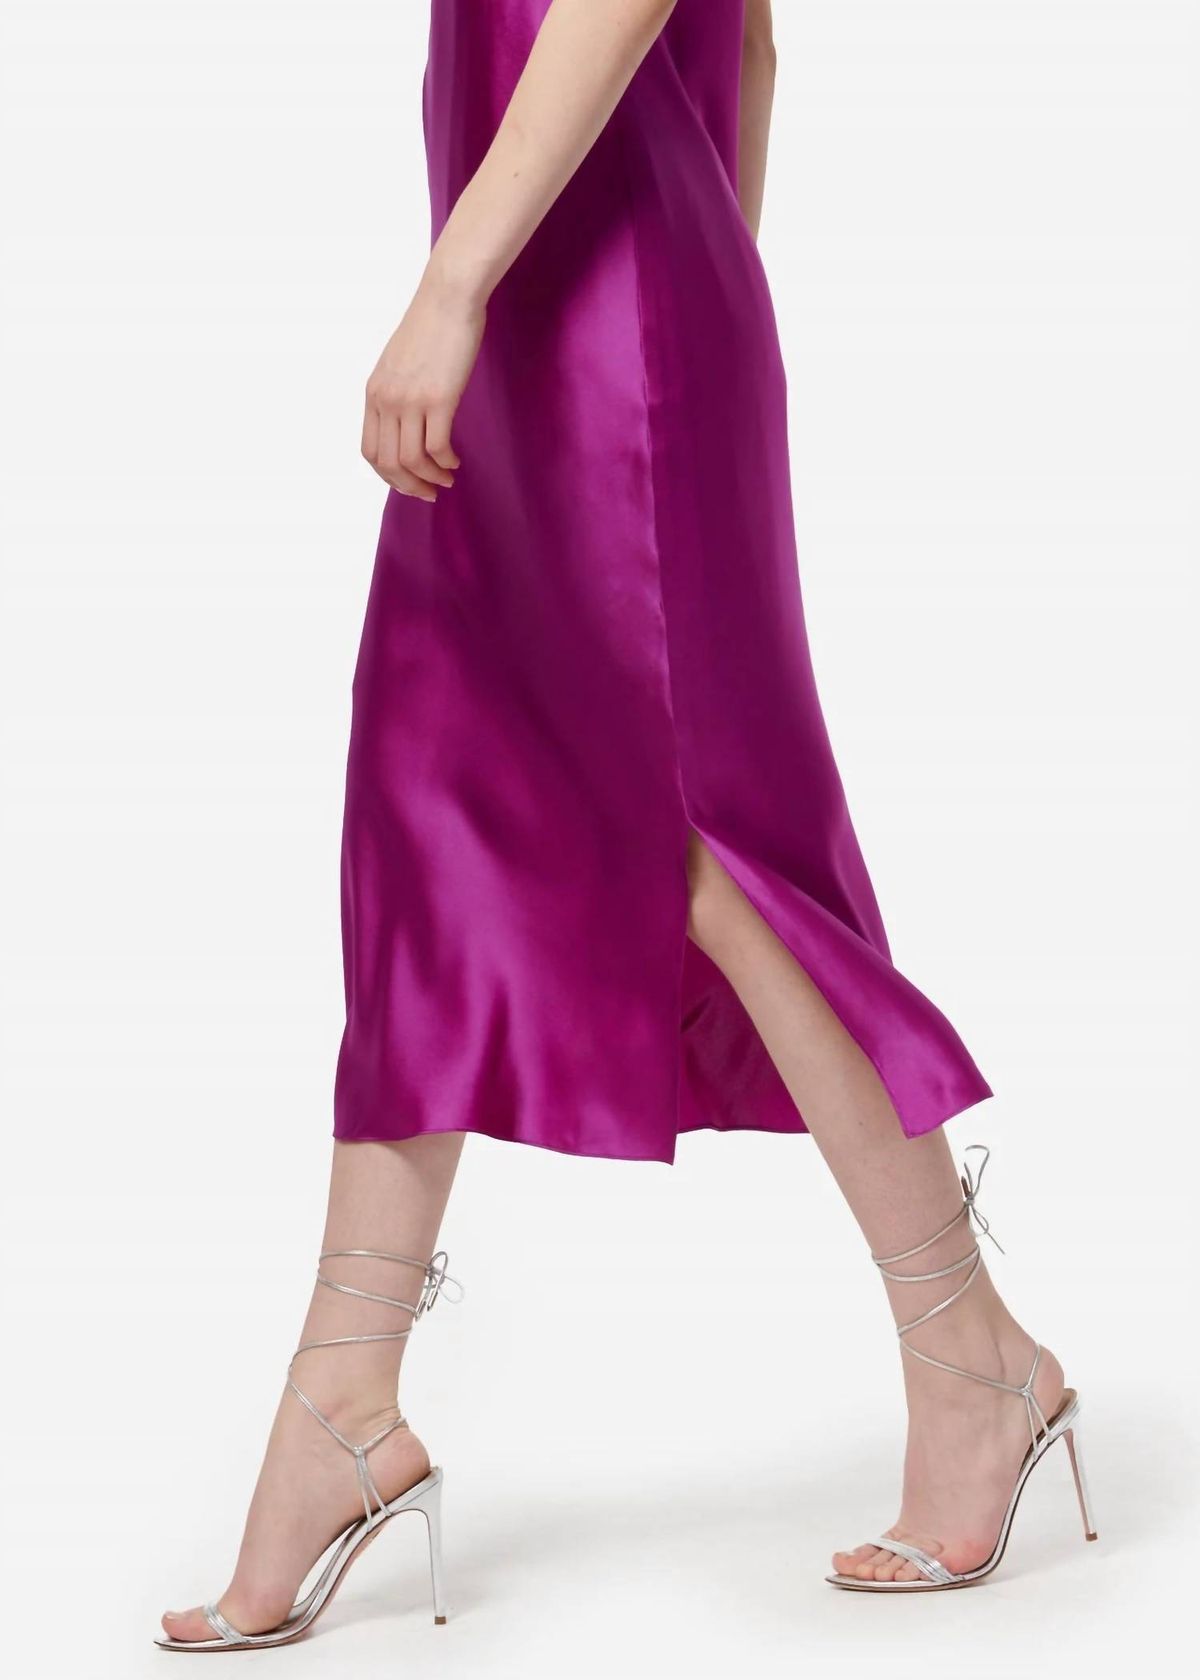 Style 1-2956852805-3236 Cami NYC Size S One Shoulder Satin Purple Cocktail Dress on Queenly